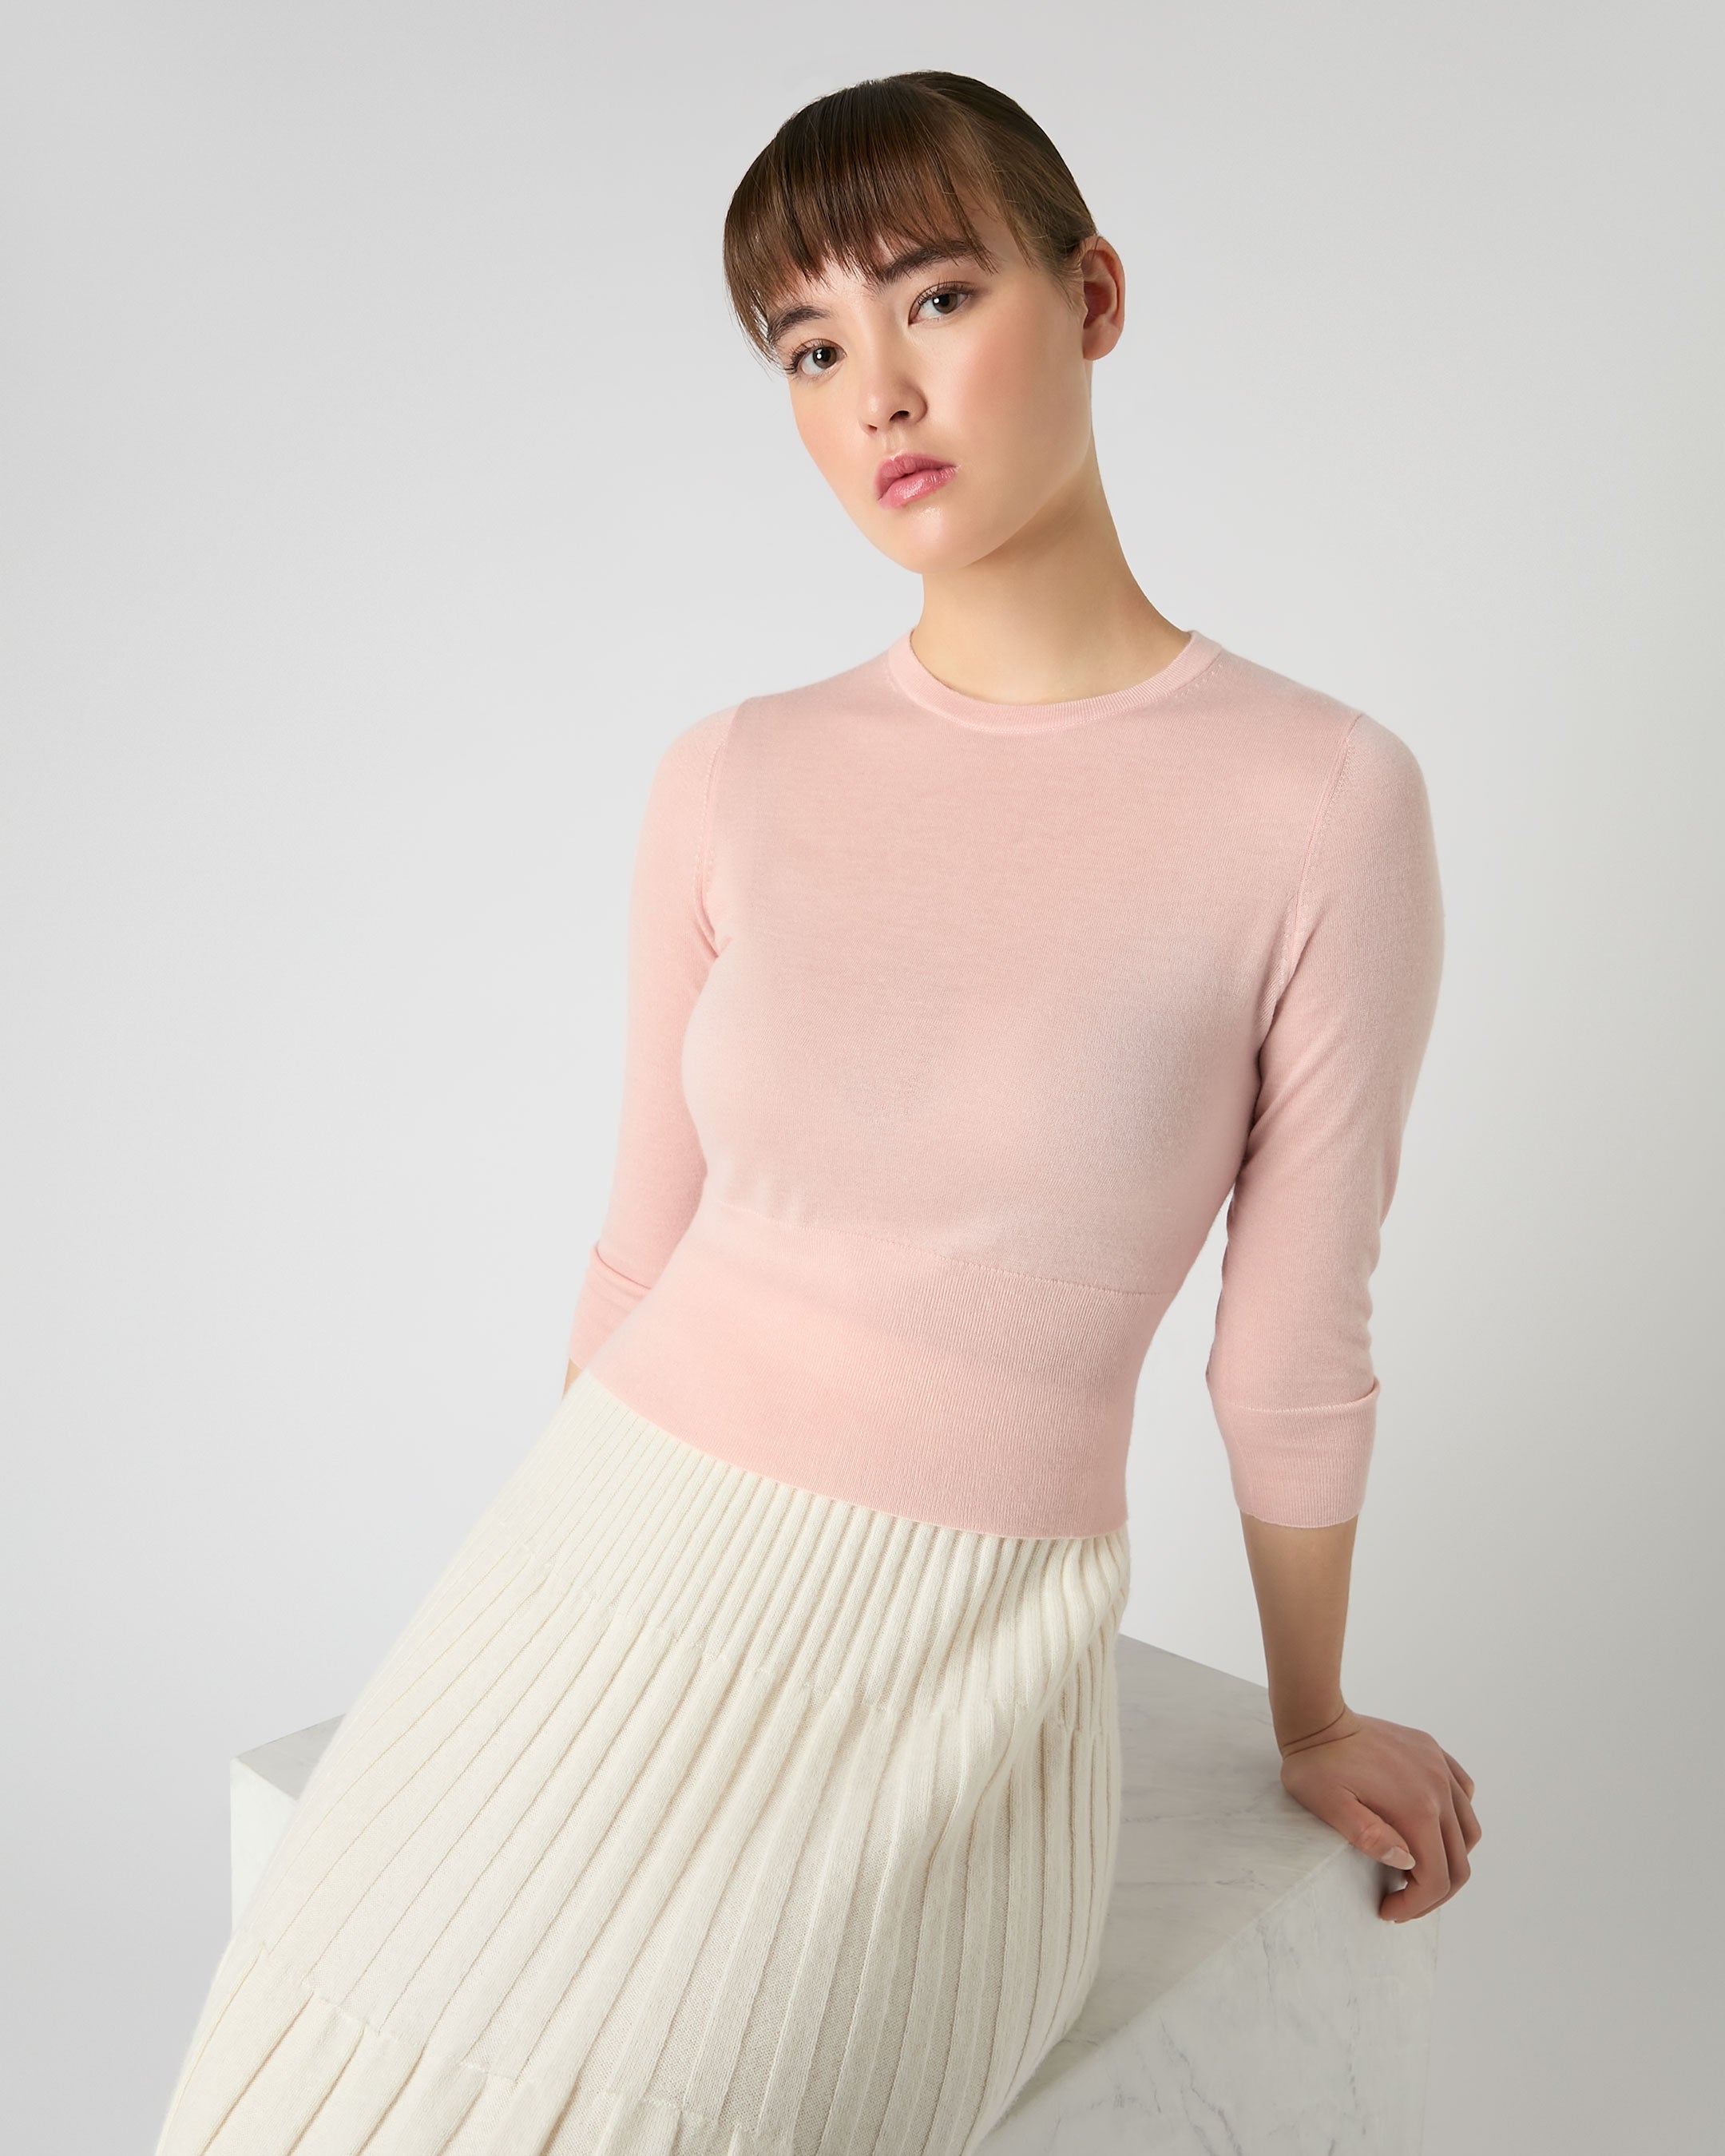 Women's Cashmere Tops, T-Shirts & Vests | N.Peal